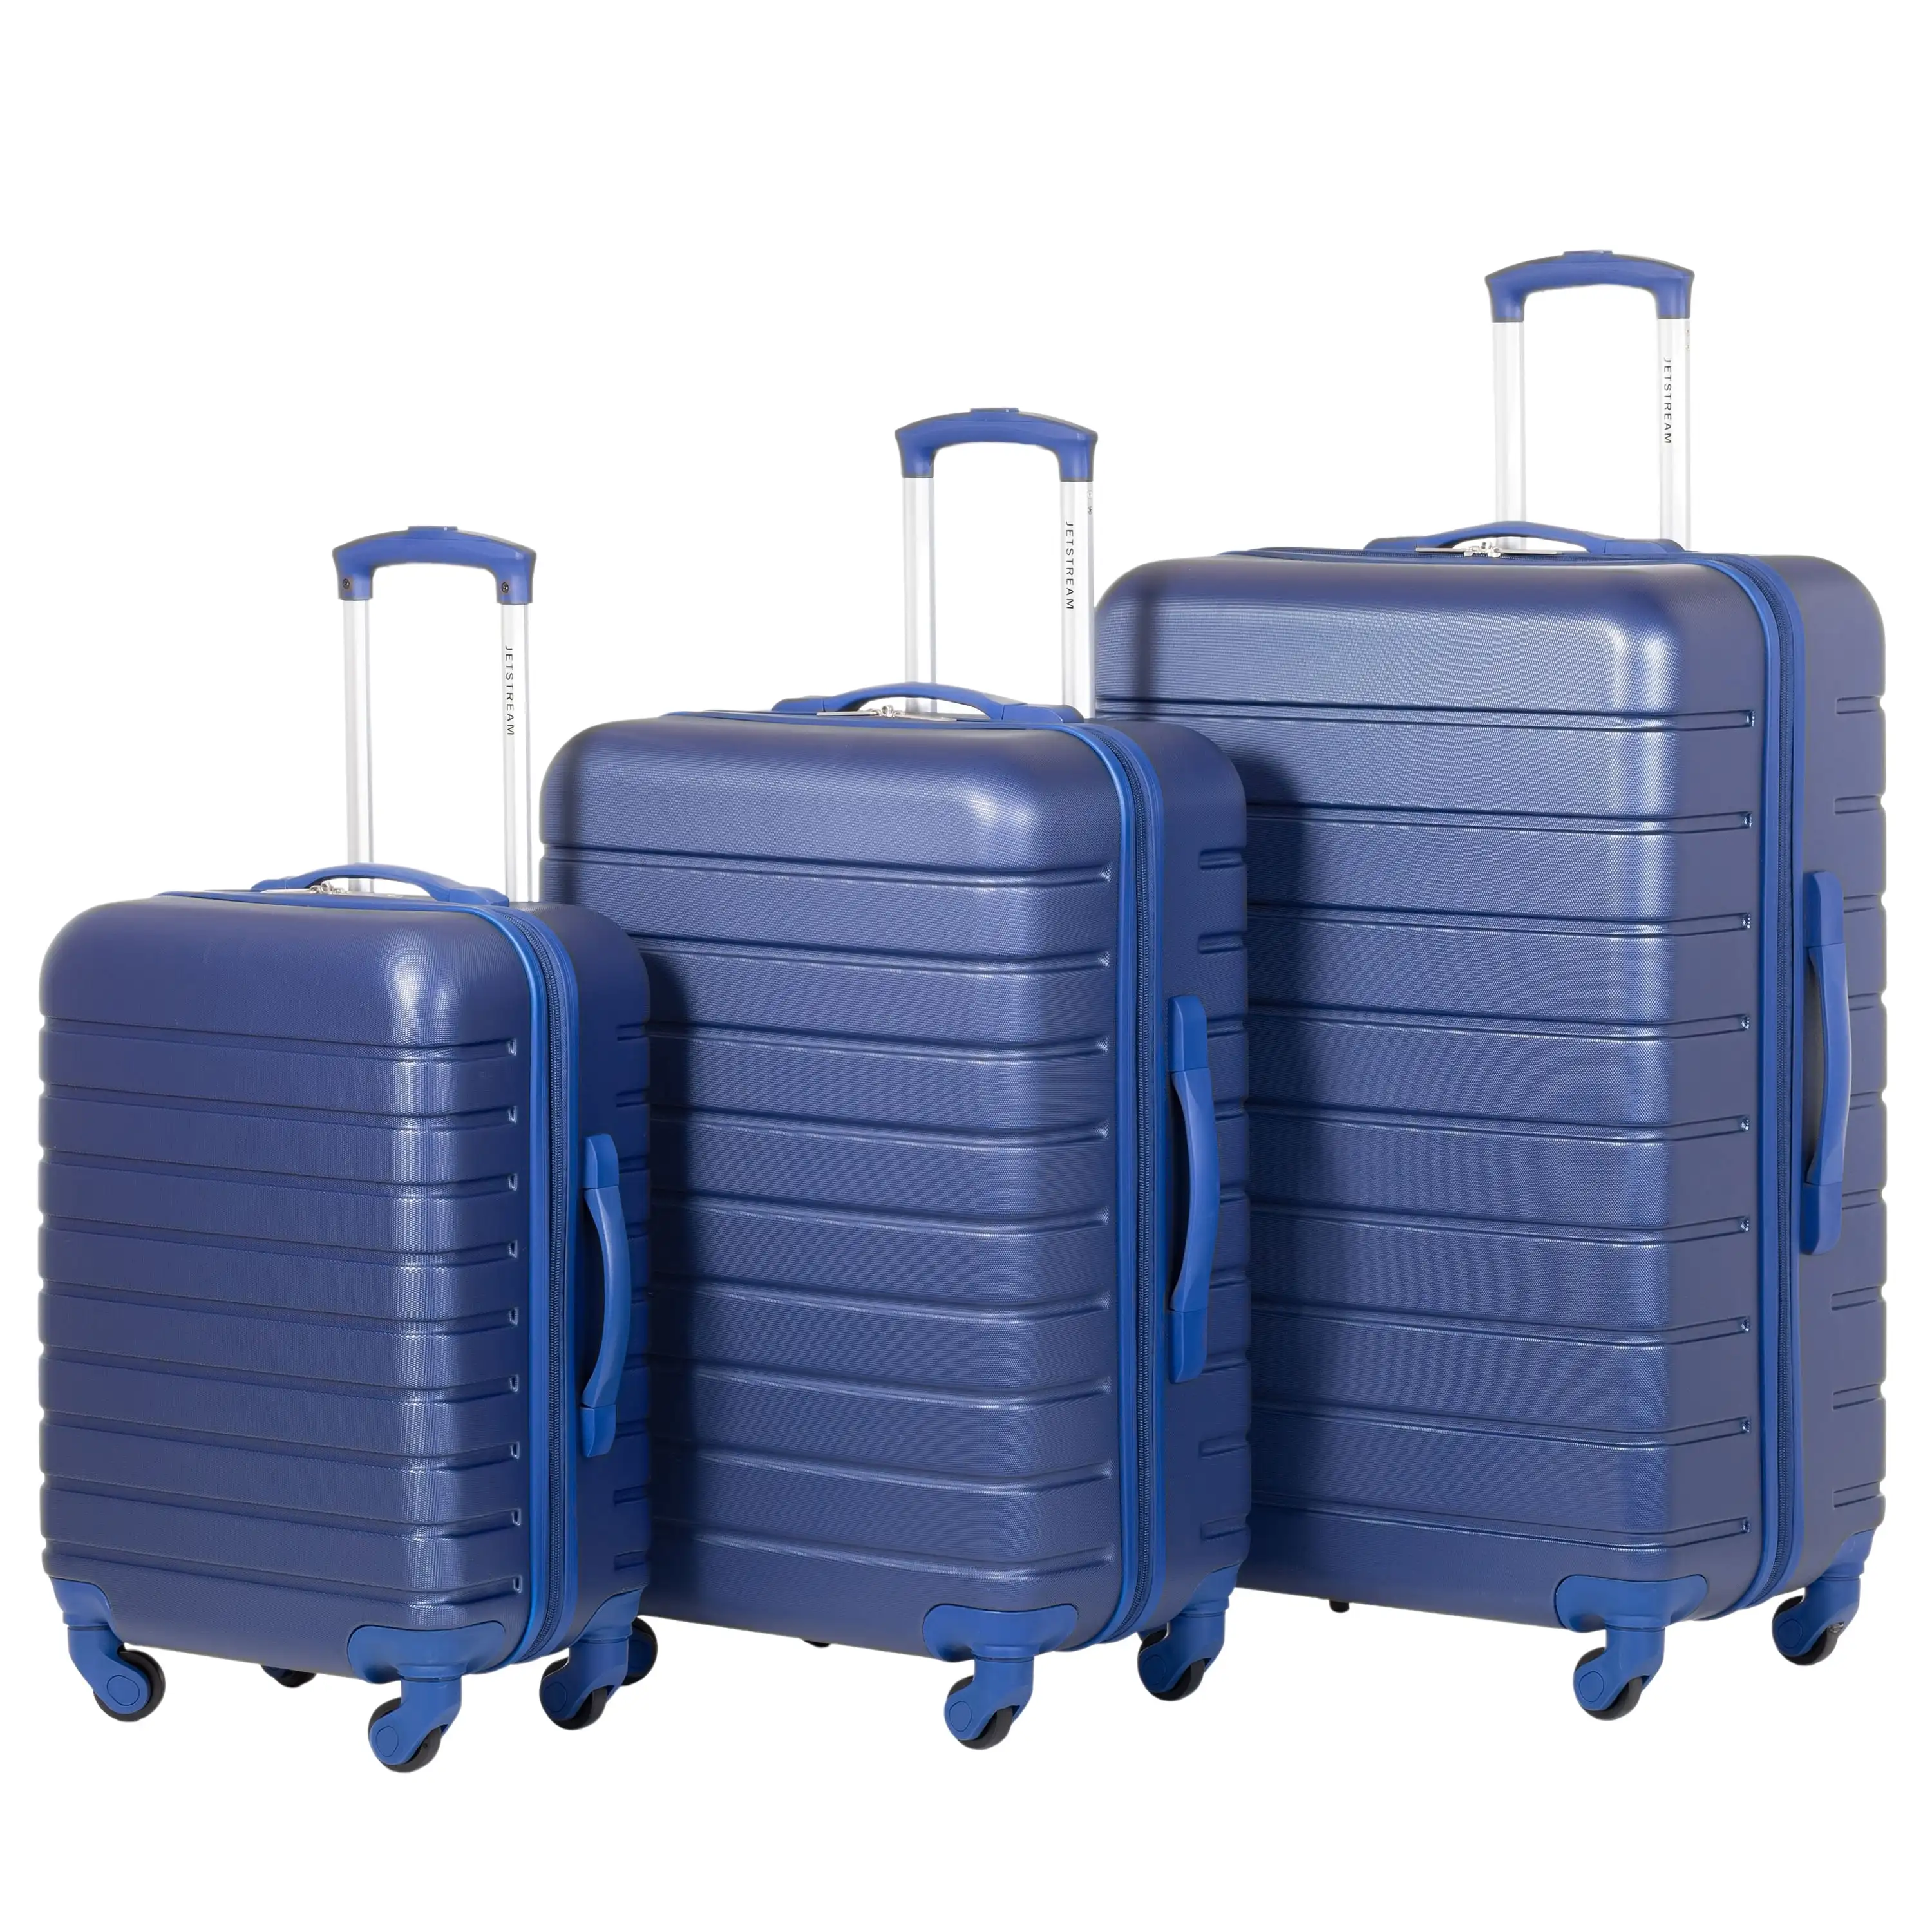 

Jetstream 3 piece Set Hardside Spinner Luggage, 20" Carry On, 24" and 28" Checked Luggage Trio, Blue